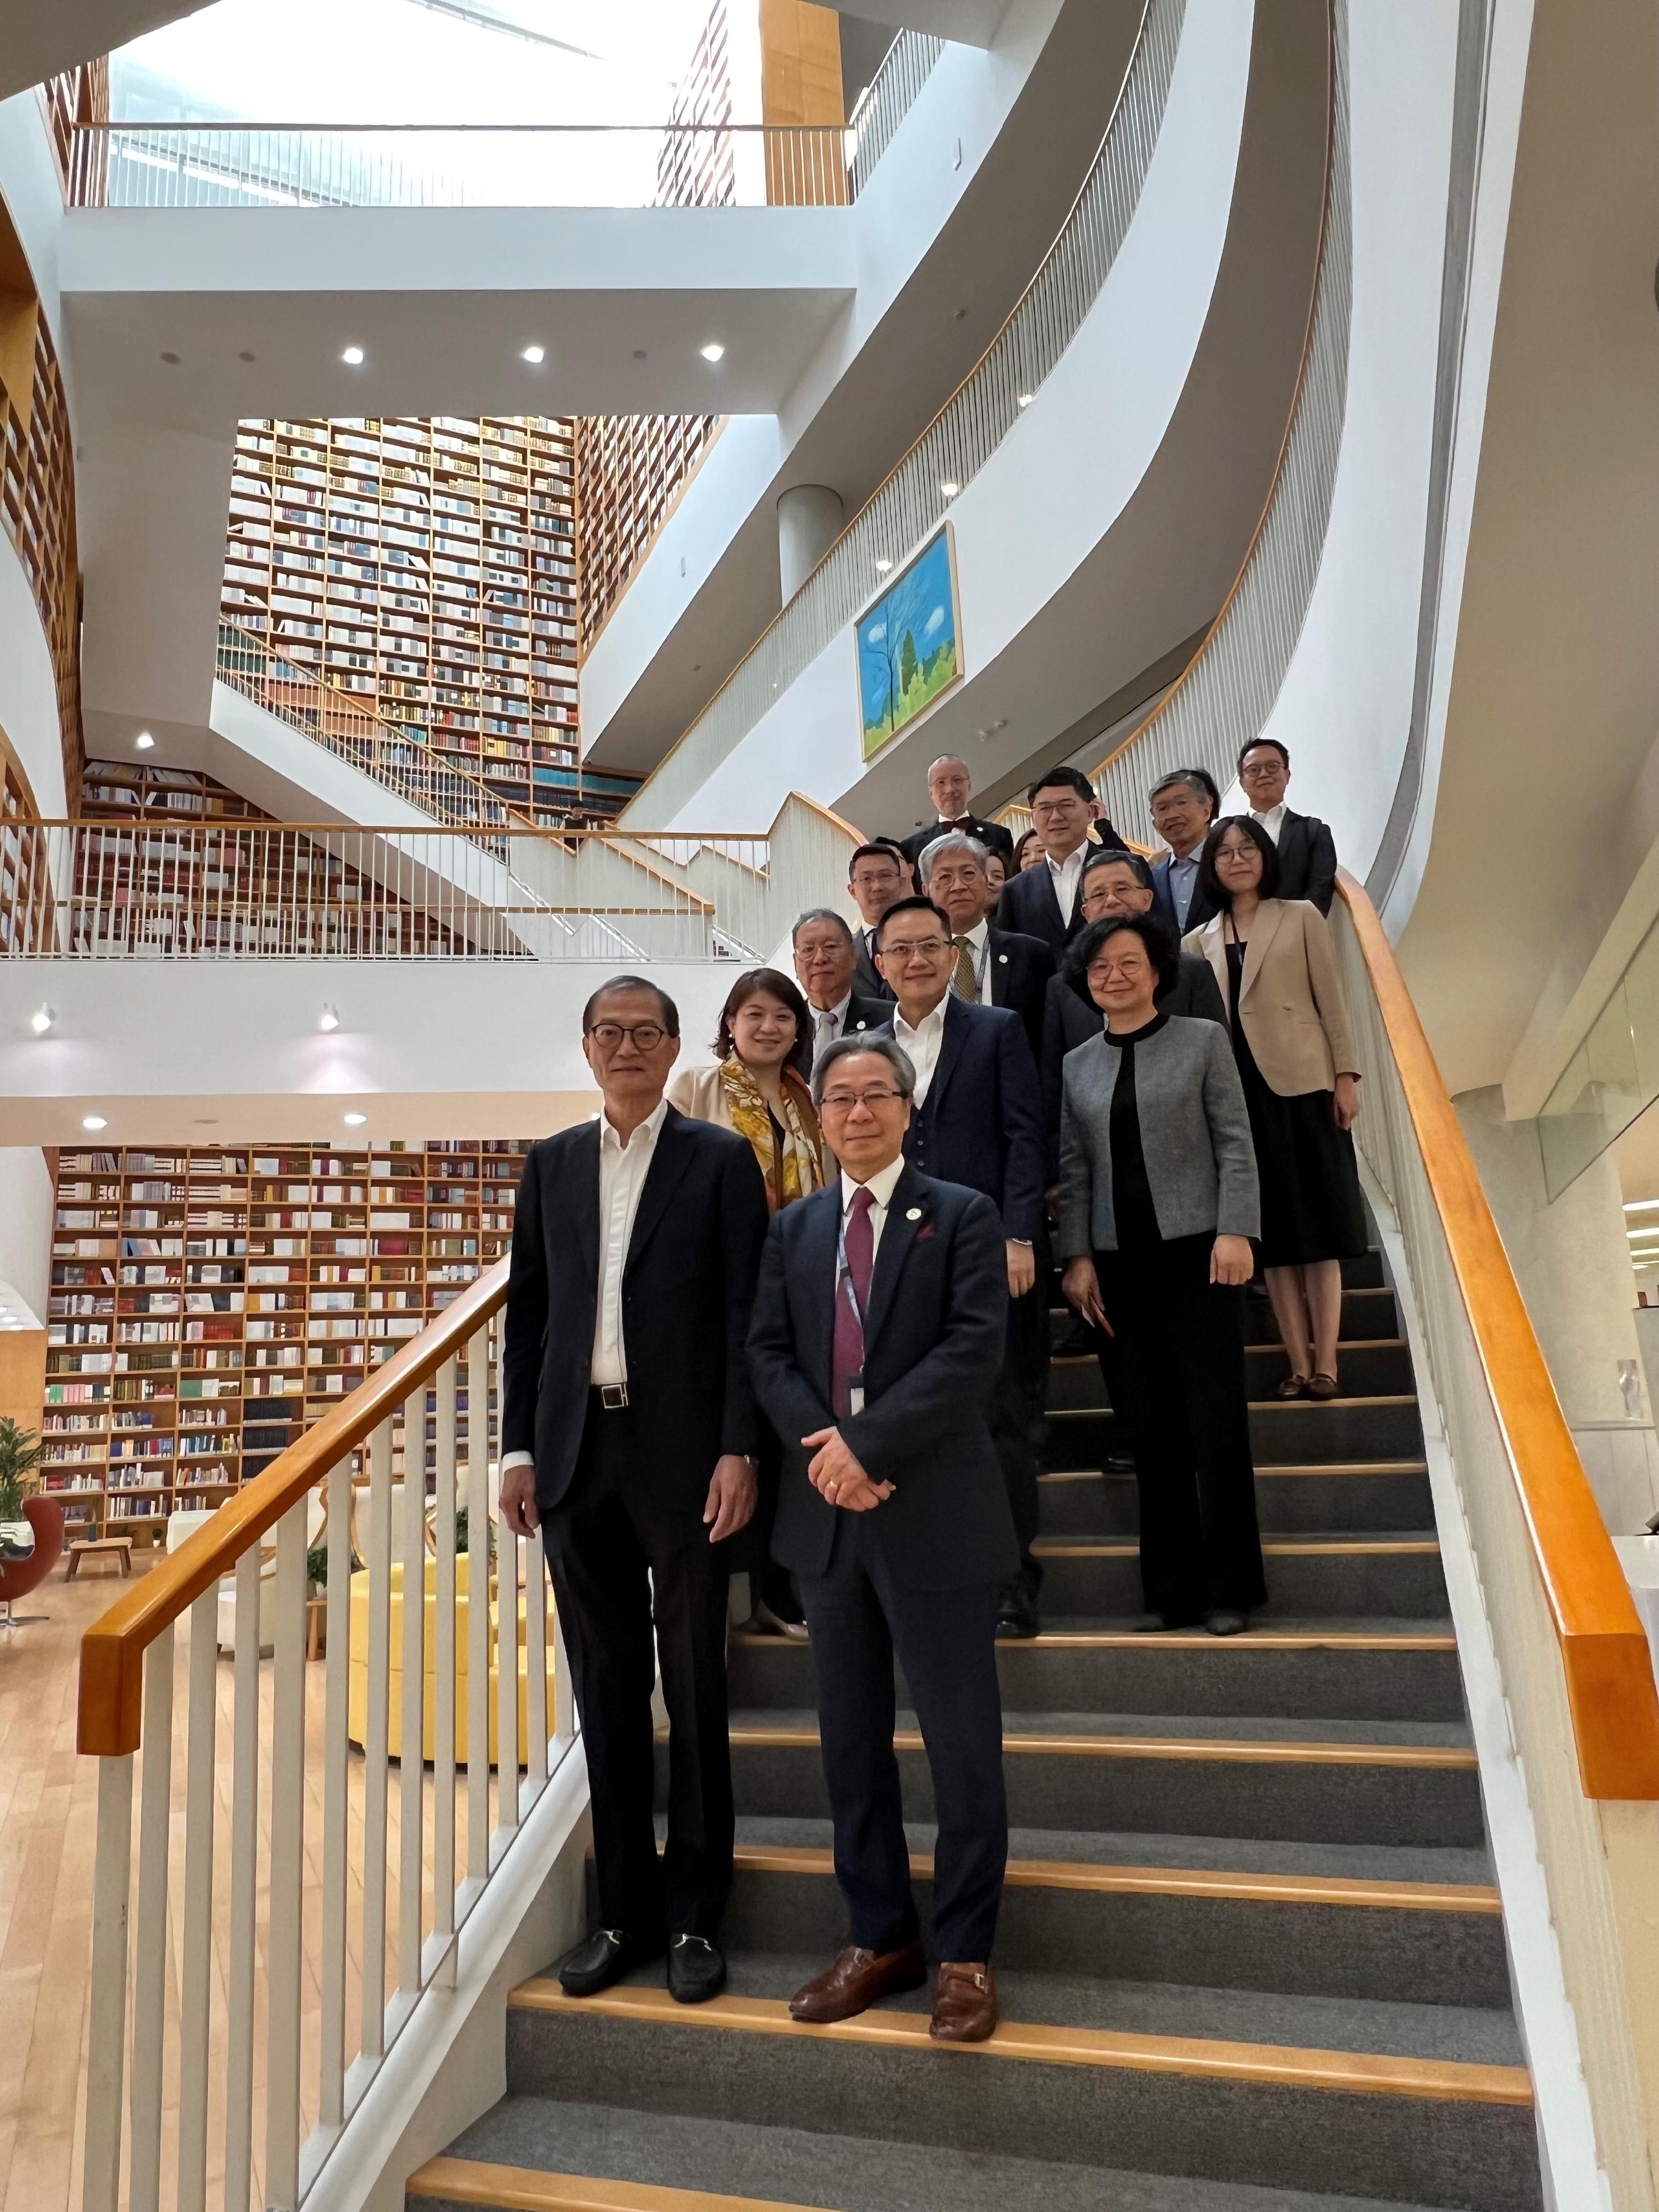 The Secretary for Health, Professor Lo Chung-mau, visited the library located at the School of Medicine of the Chinese University of Hong Kong, Shenzhen today (January 19). Photo shows Professor Lo (first row, left); the Founding Dean of the School of Medicine, Professor Davy Cheng (first row, right); the Under Secretary for Health, Dr Libby Lee (second row, left); the Director of Health, Dr Ronald Lam (second row, centre); and the Chief Executive of the Hospital Authority, Dr Tony Ko (fourth row, second right).